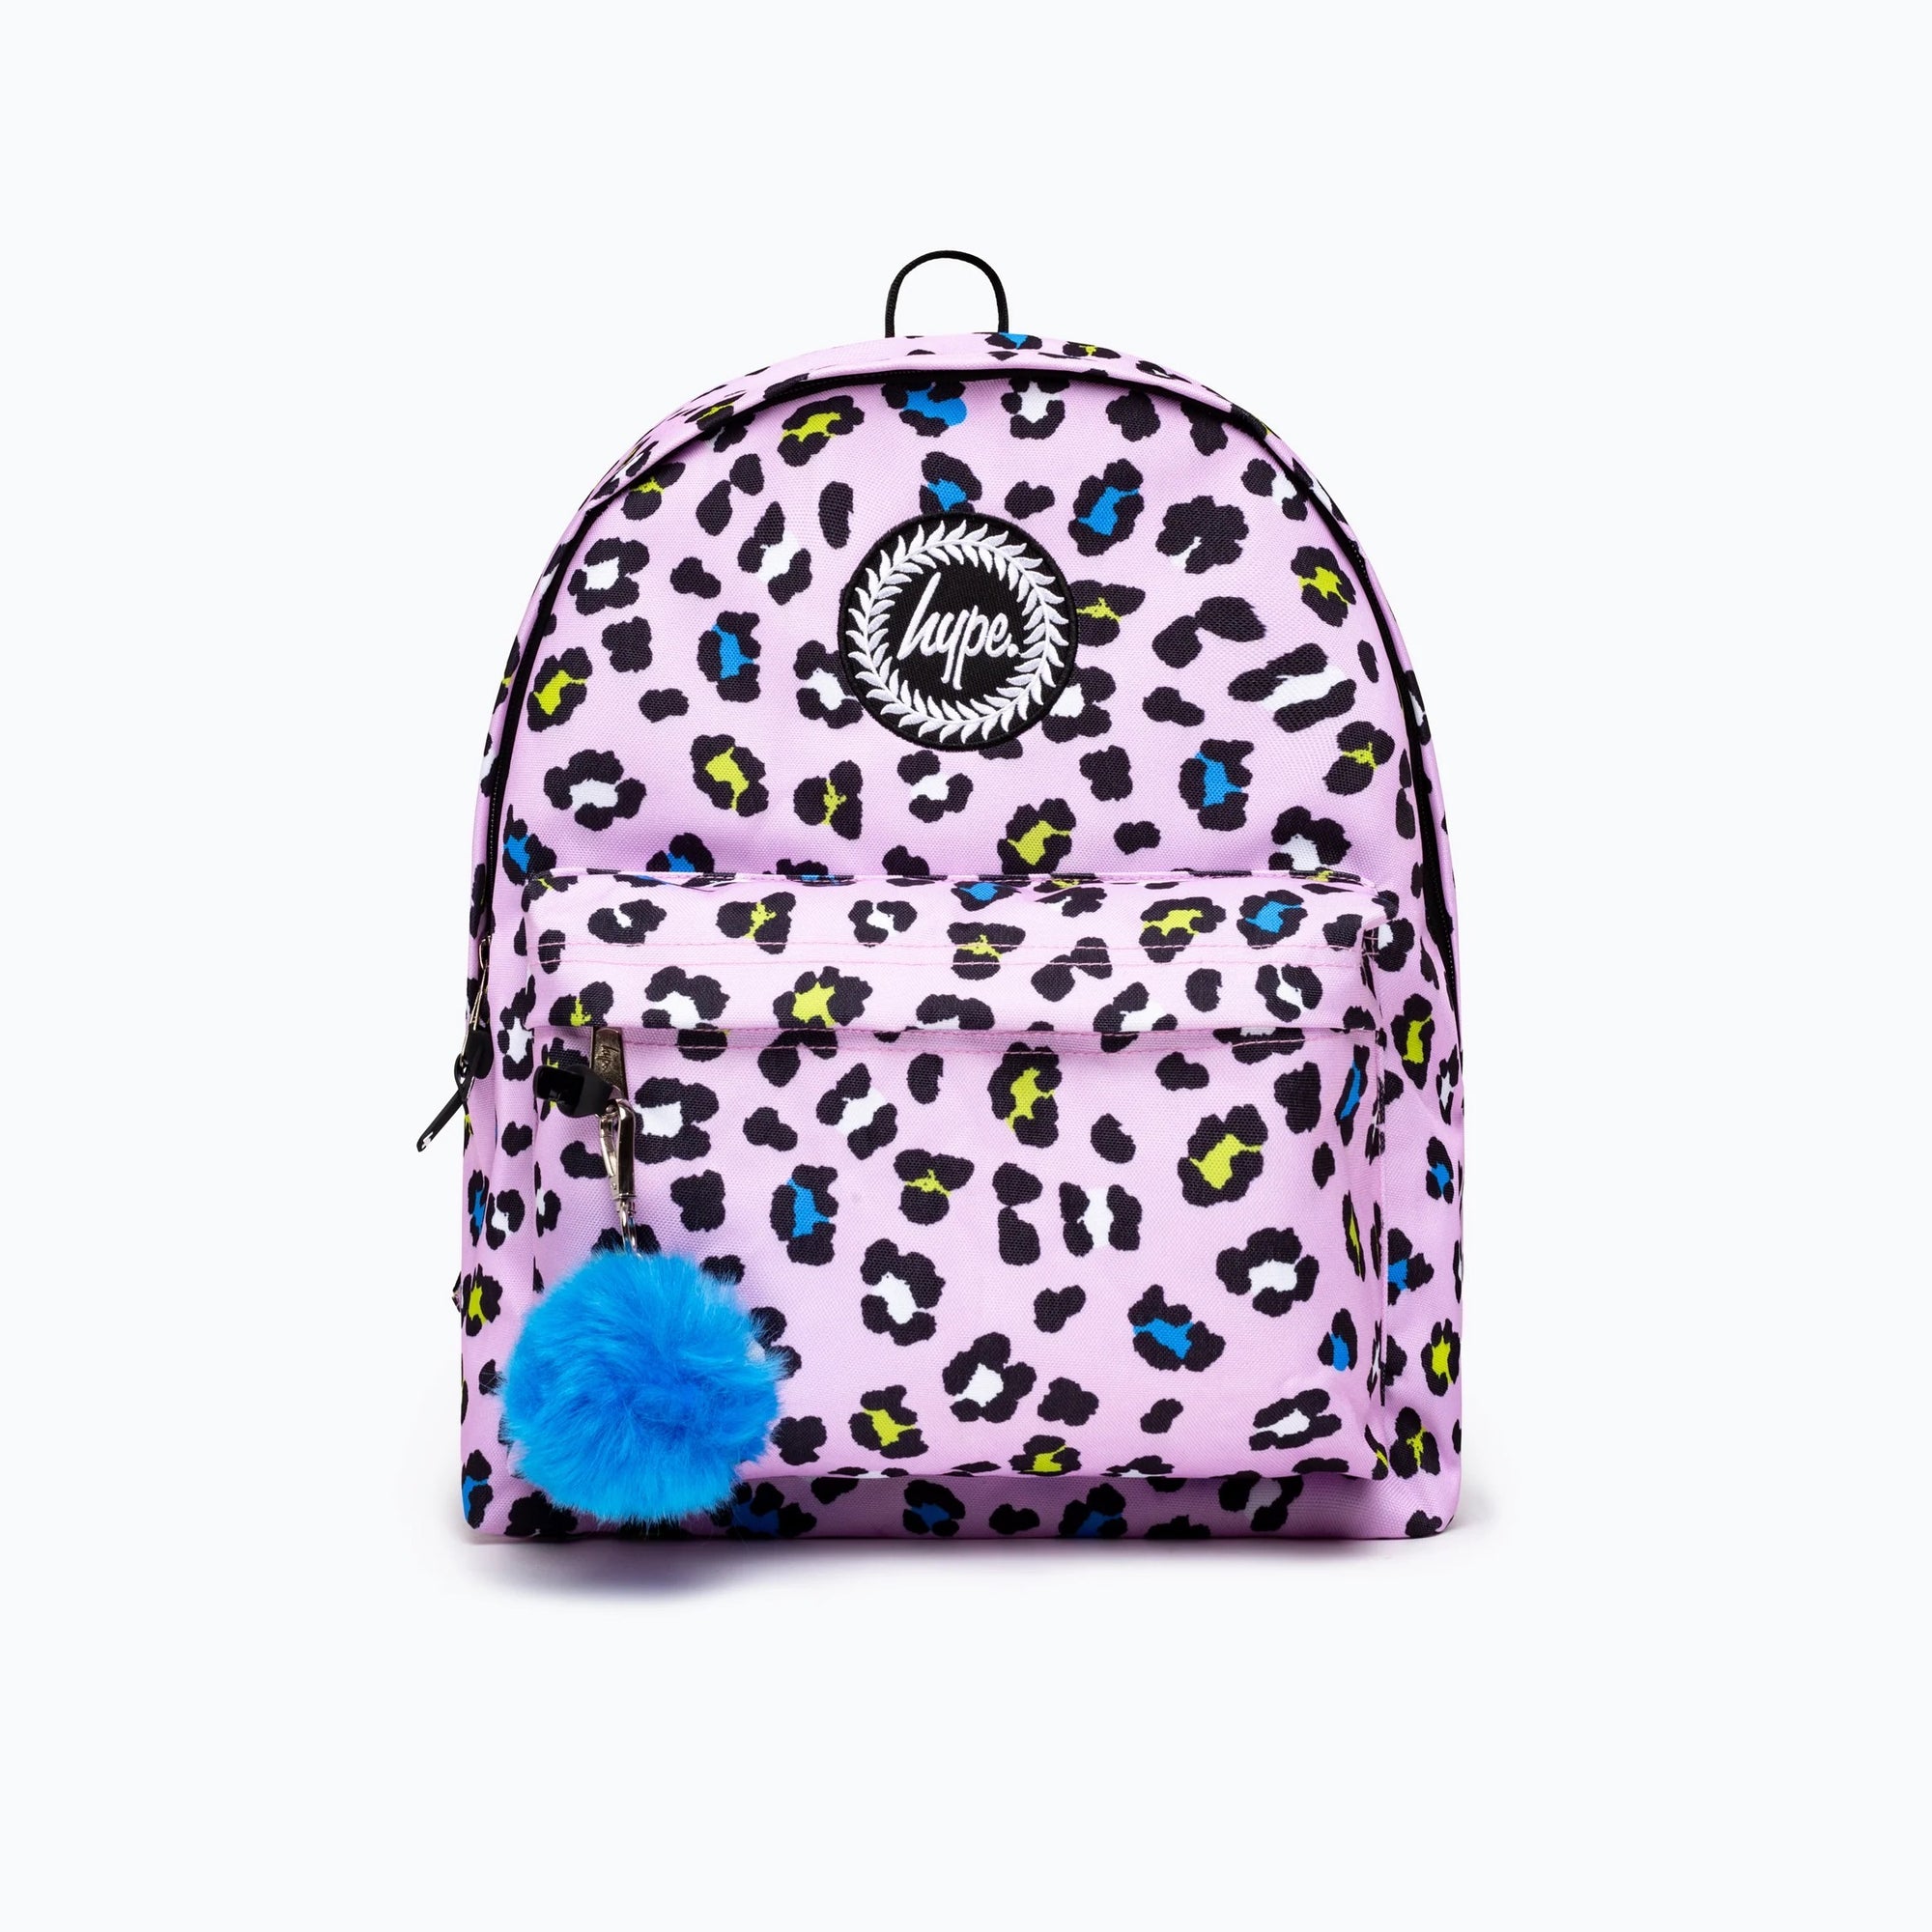 Hype Lilac Leopard Backpack Xucb-040 Accessories ONE SIZE / Lilac